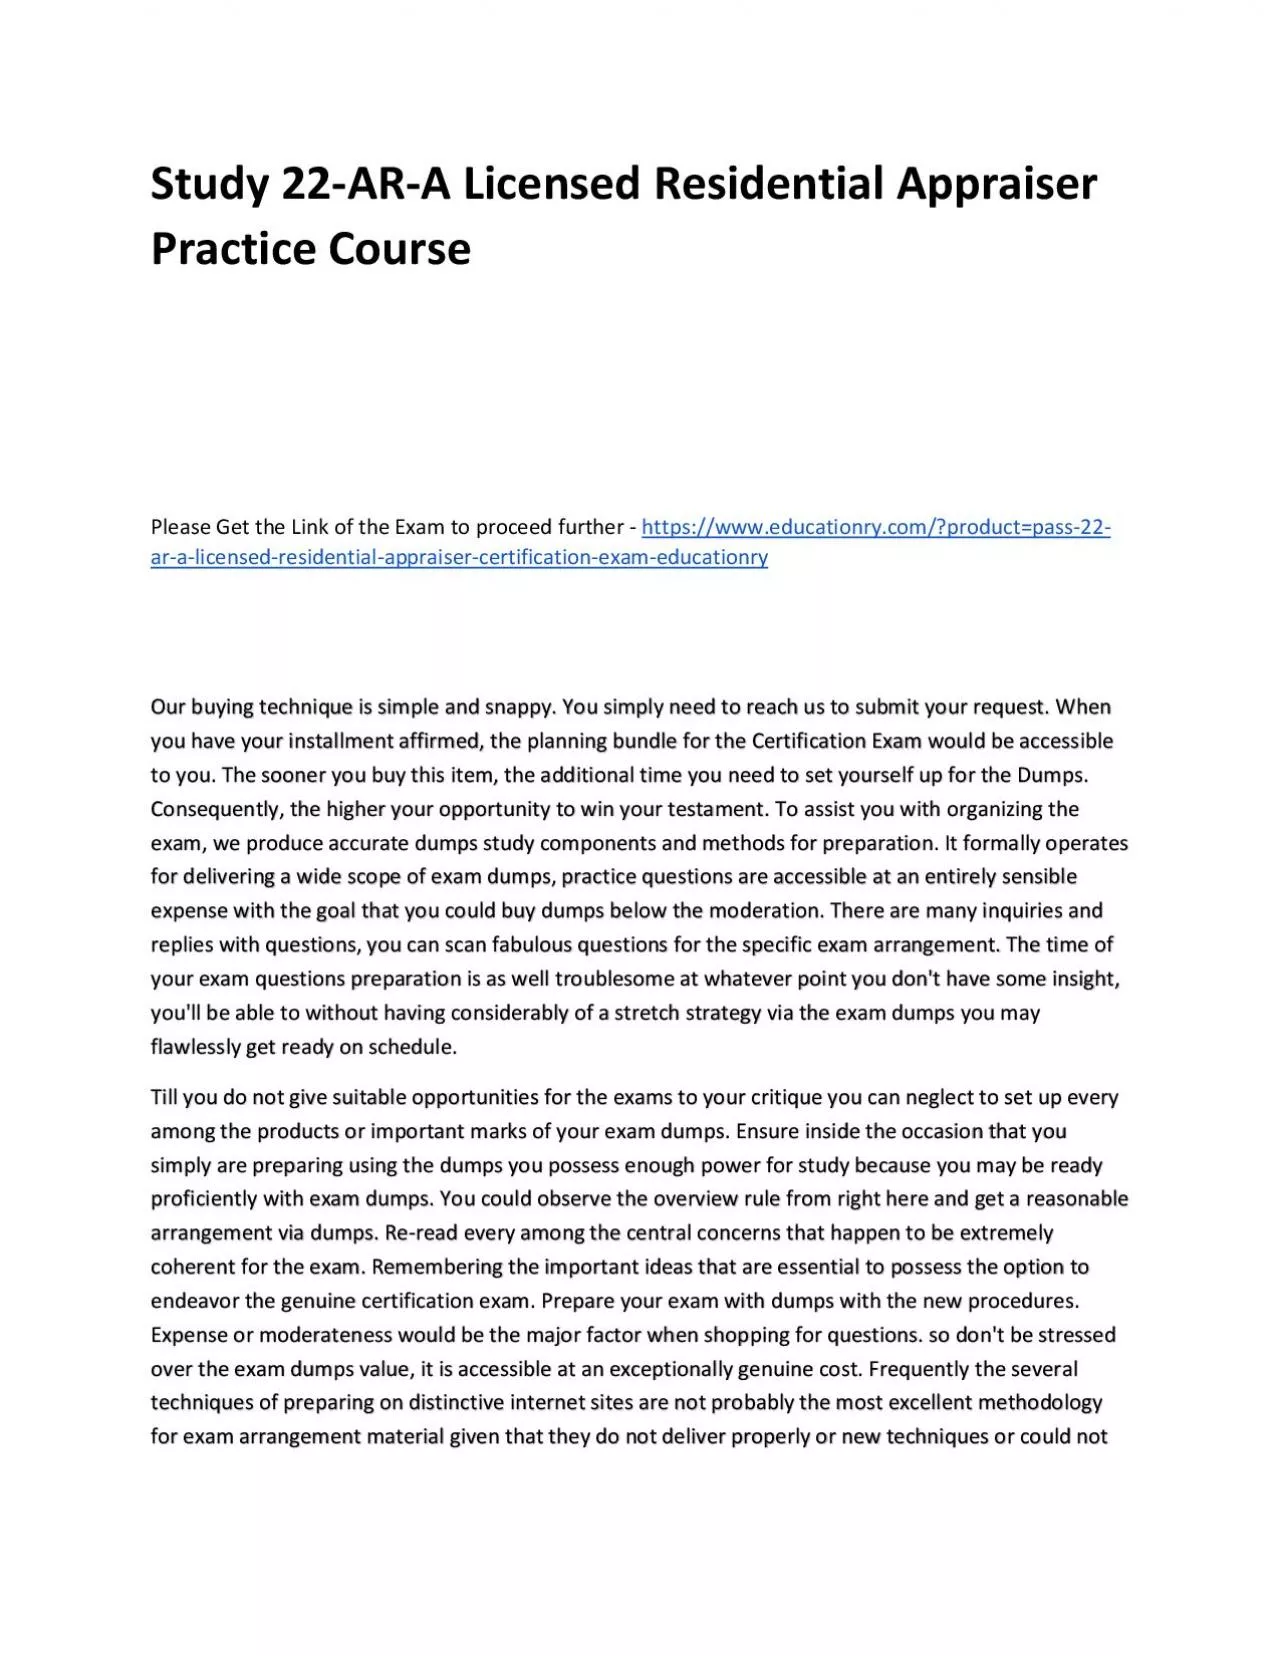 Study 22-AR-A Licensed Residential Appraiser Practice Course